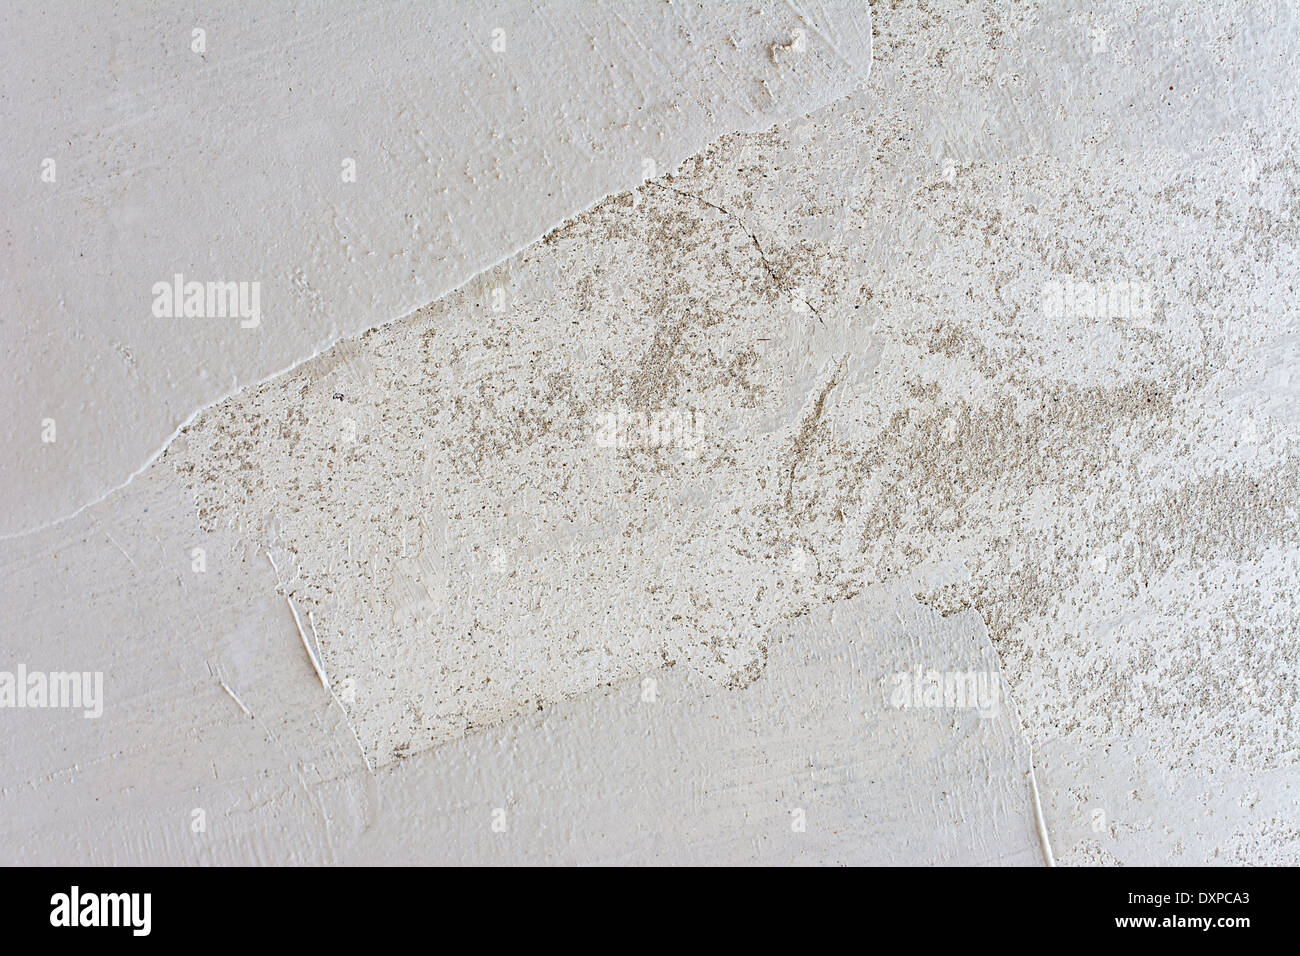 Preparation of Mortar Ceiling with Plastering Layer before Painting, Horizontal shot from below Stock Photo